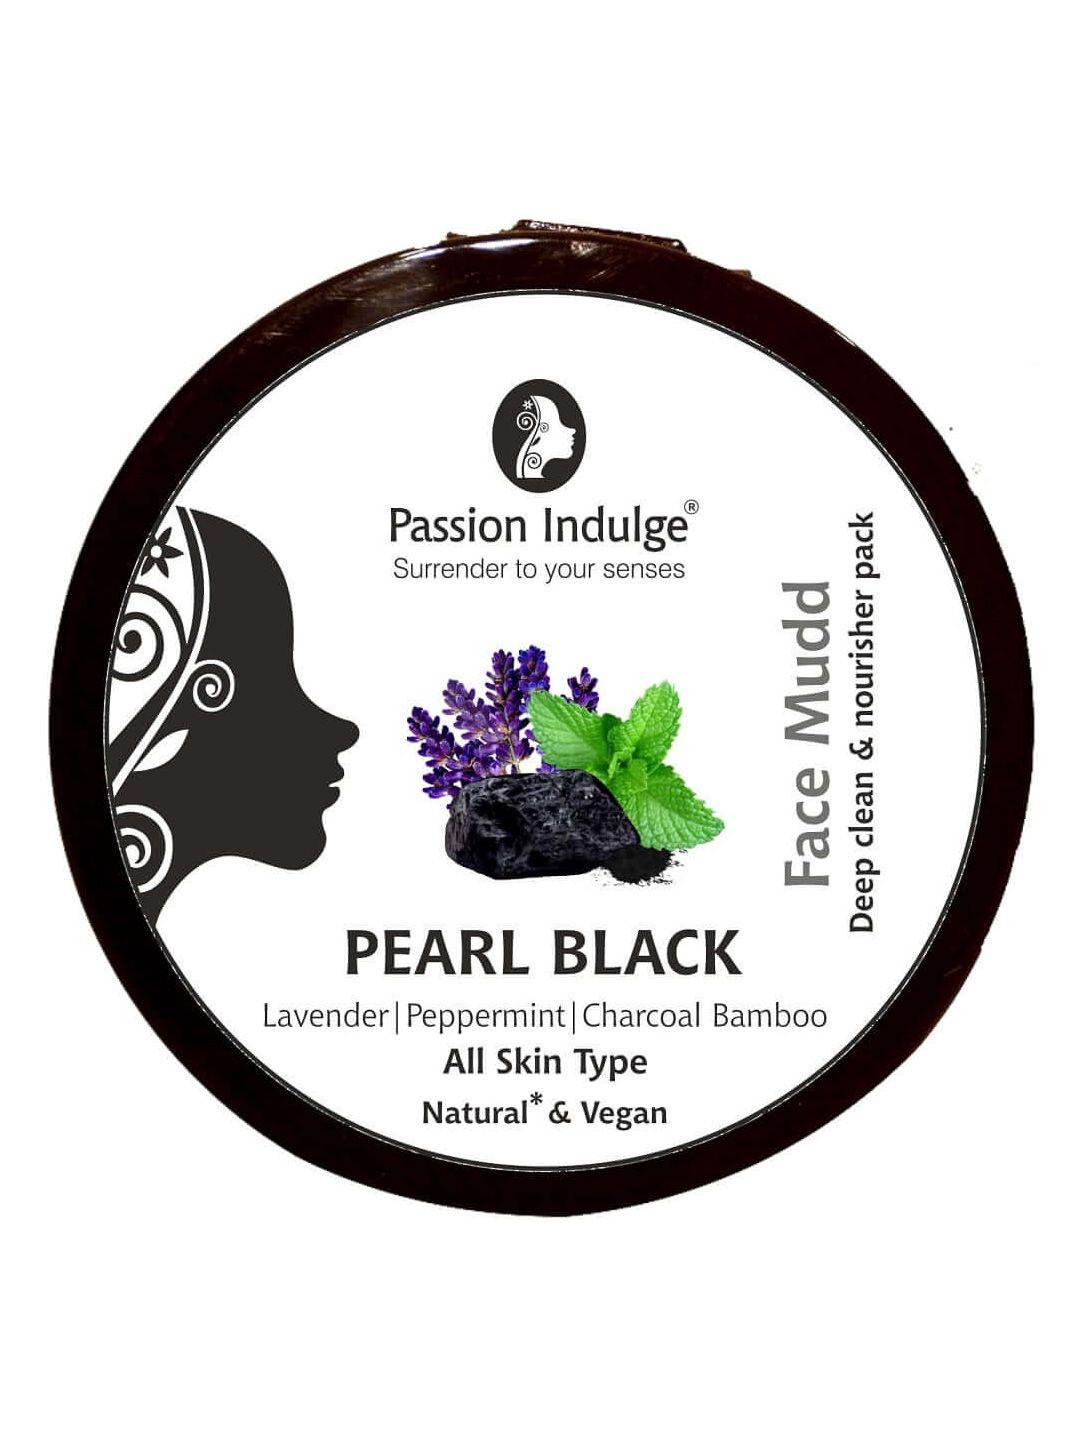 passion indulge pearl black face mudd pack infused with lavender & charcoal 250 g